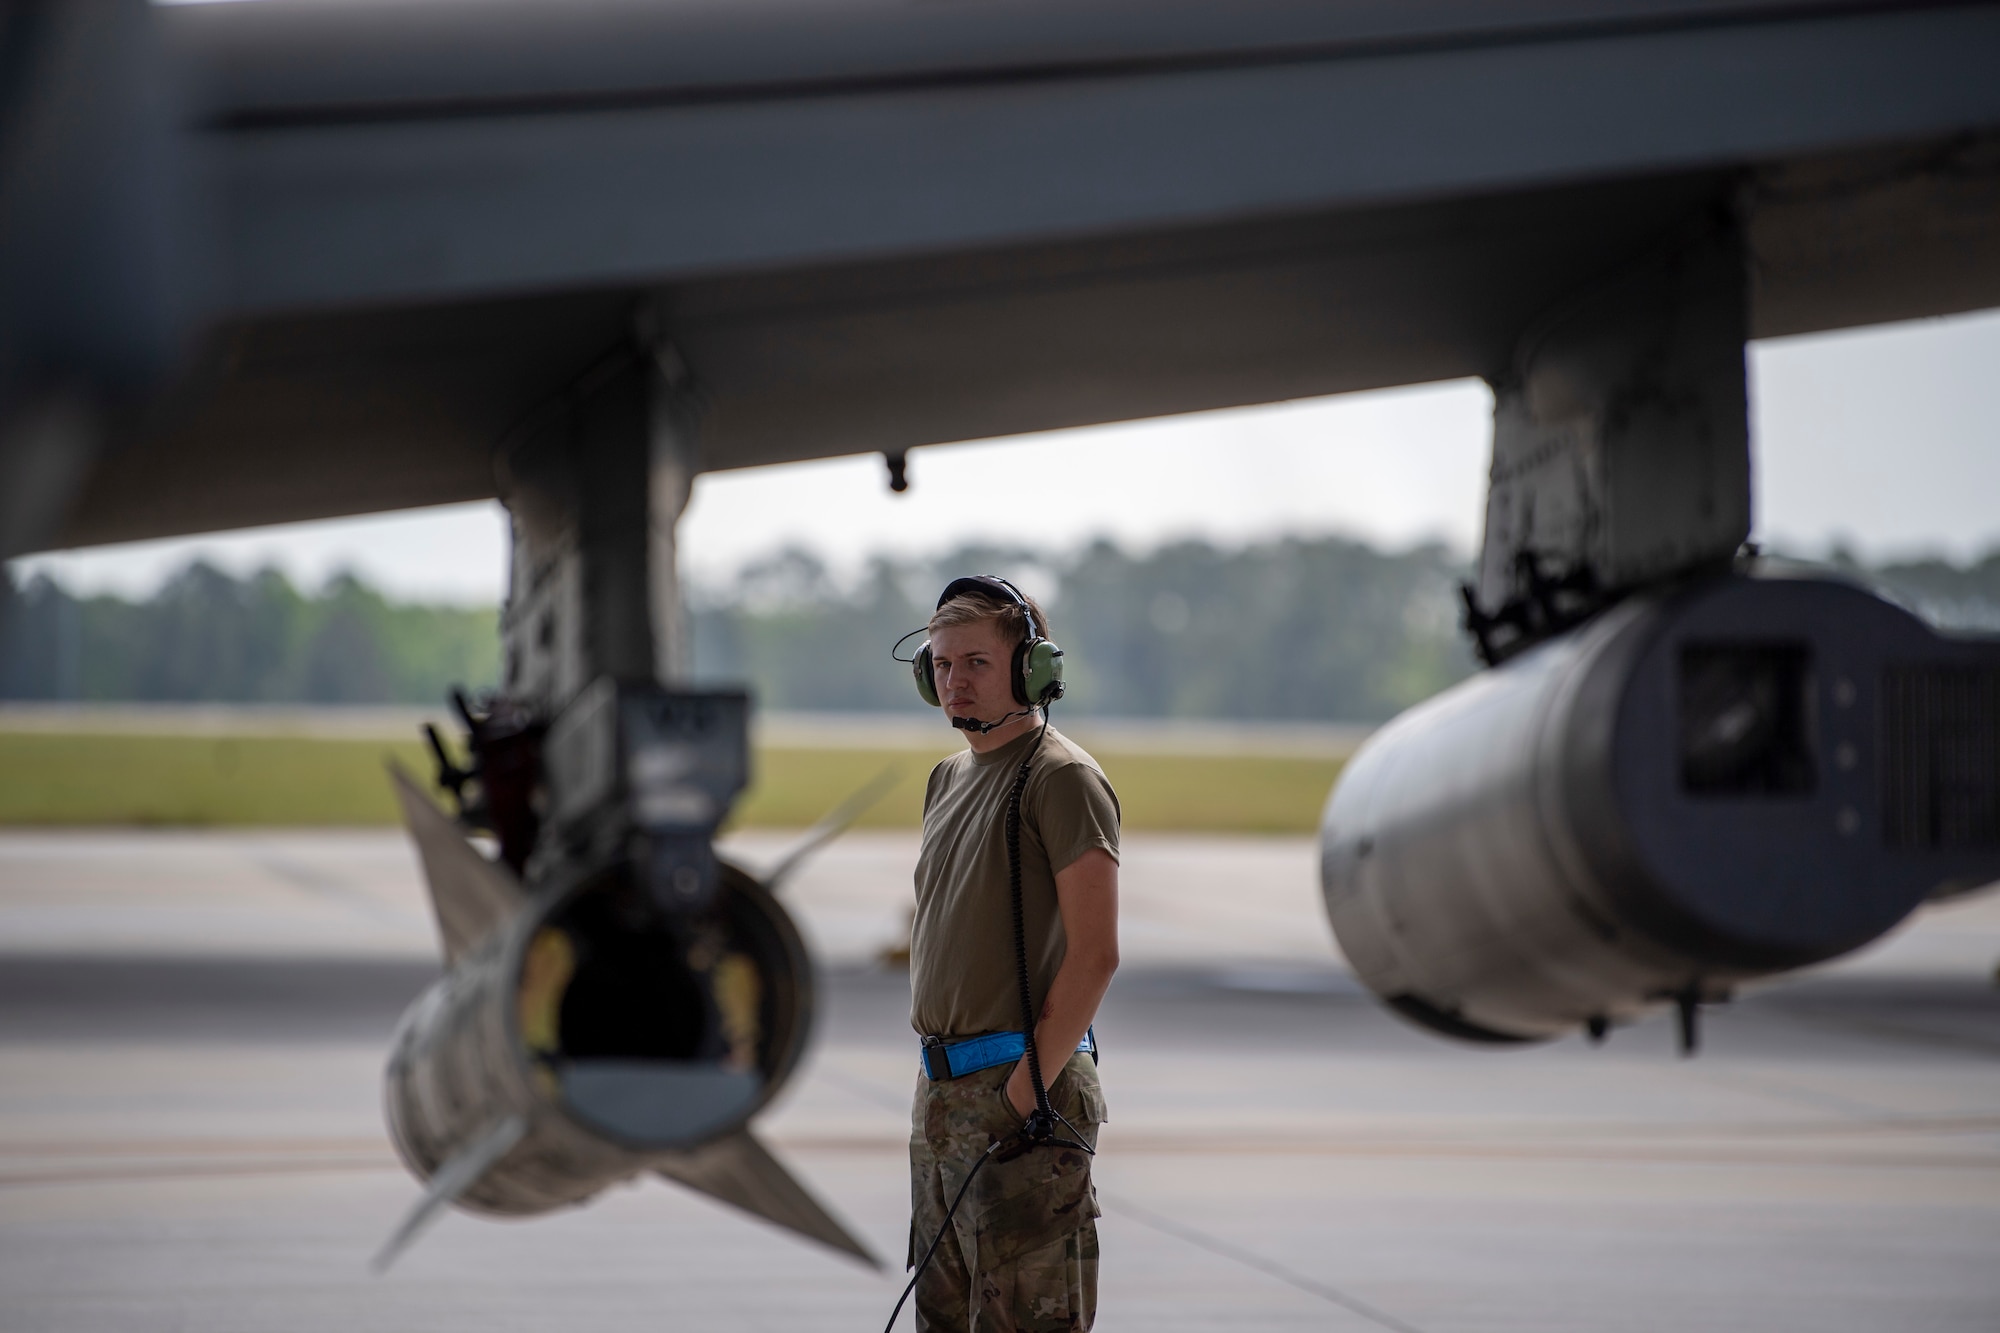 A U.S. Air Force Airman assigned to the 23rd Maintenance Group prepares an A-10C Thunderbolt II for take-off during Exercise Ready Tiger 24-1 at Moody Air Force Base, Georgia, April 9, 2024. The 23rd MXG is responsible for the operation and quality of organization and intermediate-level maintenance and repair supporting a combat-ready HC-130J Combat King II, HH-60W Jolly Green II and A-10 aircraft. Ready Tiger 24-1 is a readiness exercise demonstrating the 23rd Wing’s ability to plan, prepare and execute operations and maintenance to project air power in contested and dispersed locations, defending the United States’ interests and allies. (U.S. Air Force photo by 2nd Lt. Benjamin Williams)